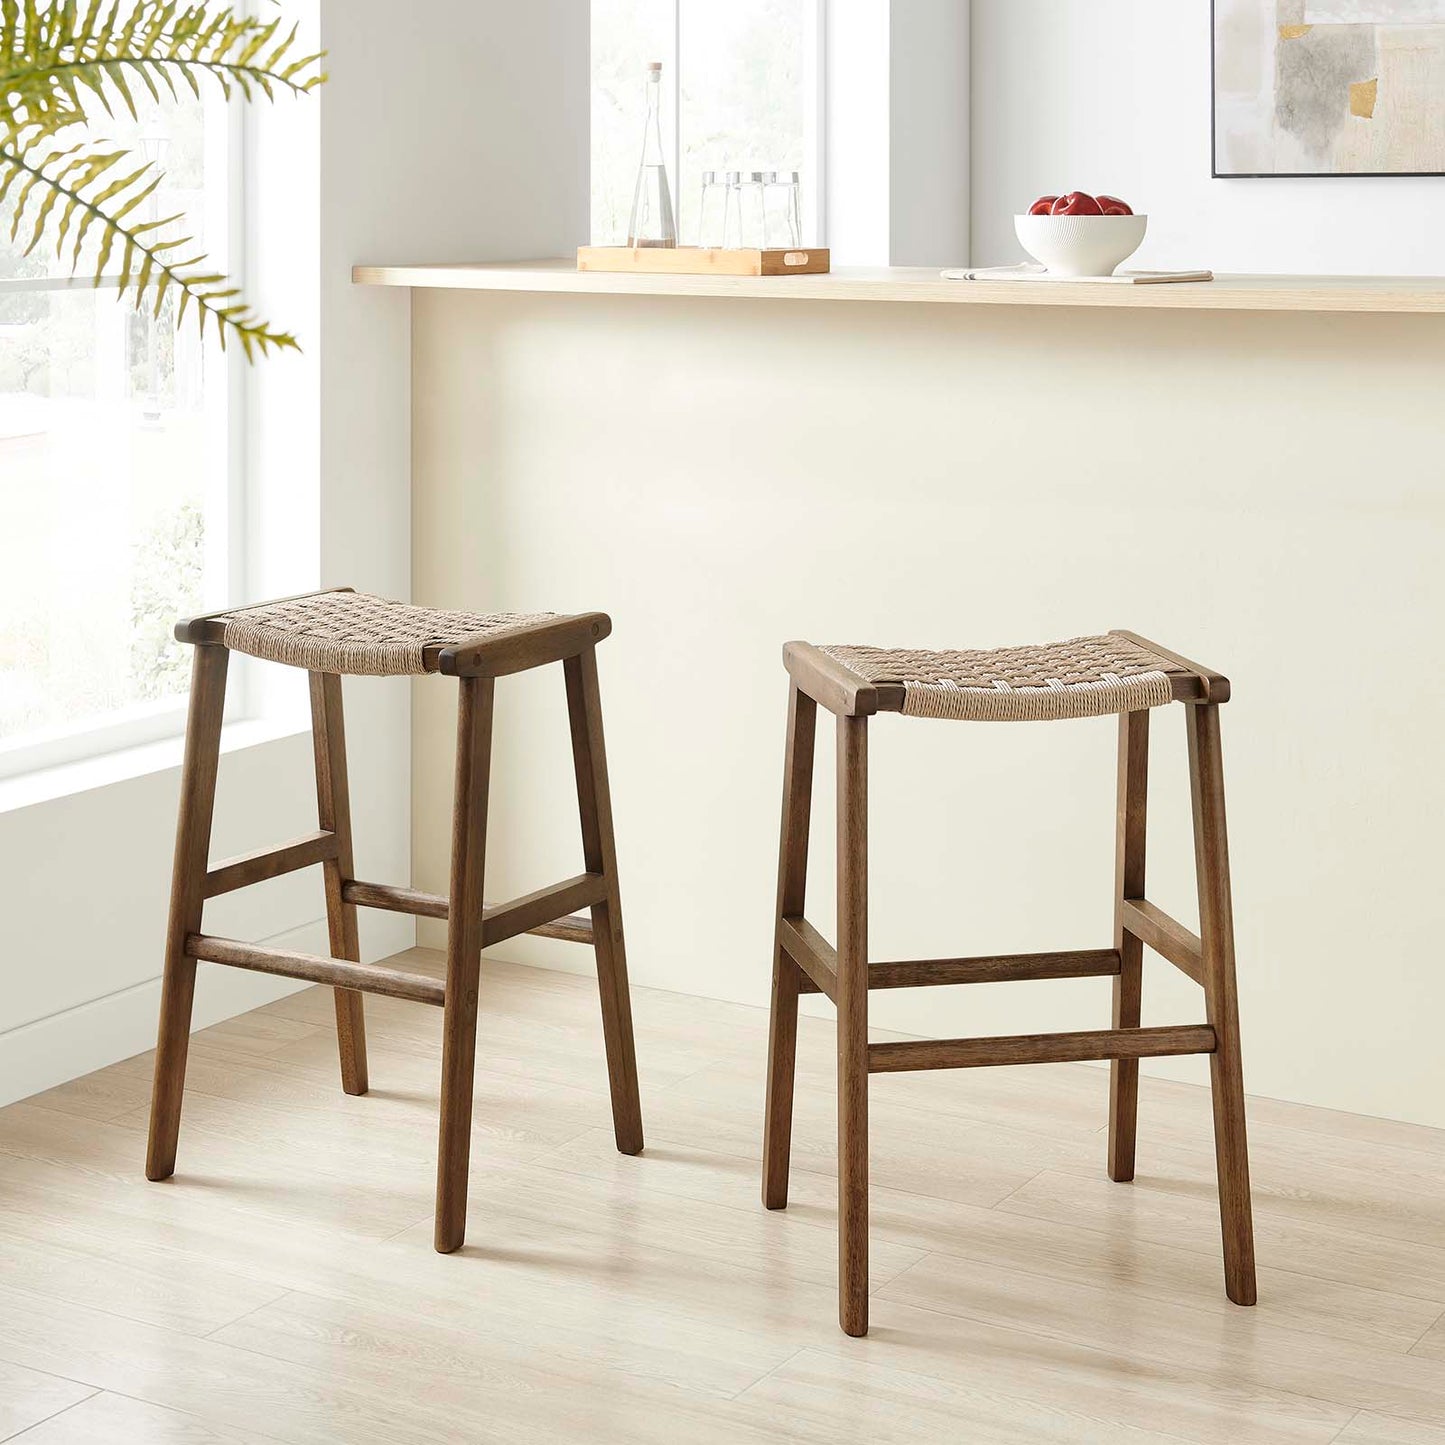 Saoirse Woven Rope Wood Bar Stool - Set of 2 By Modway - EEI-6550 | Bar Stools | Modway - 34